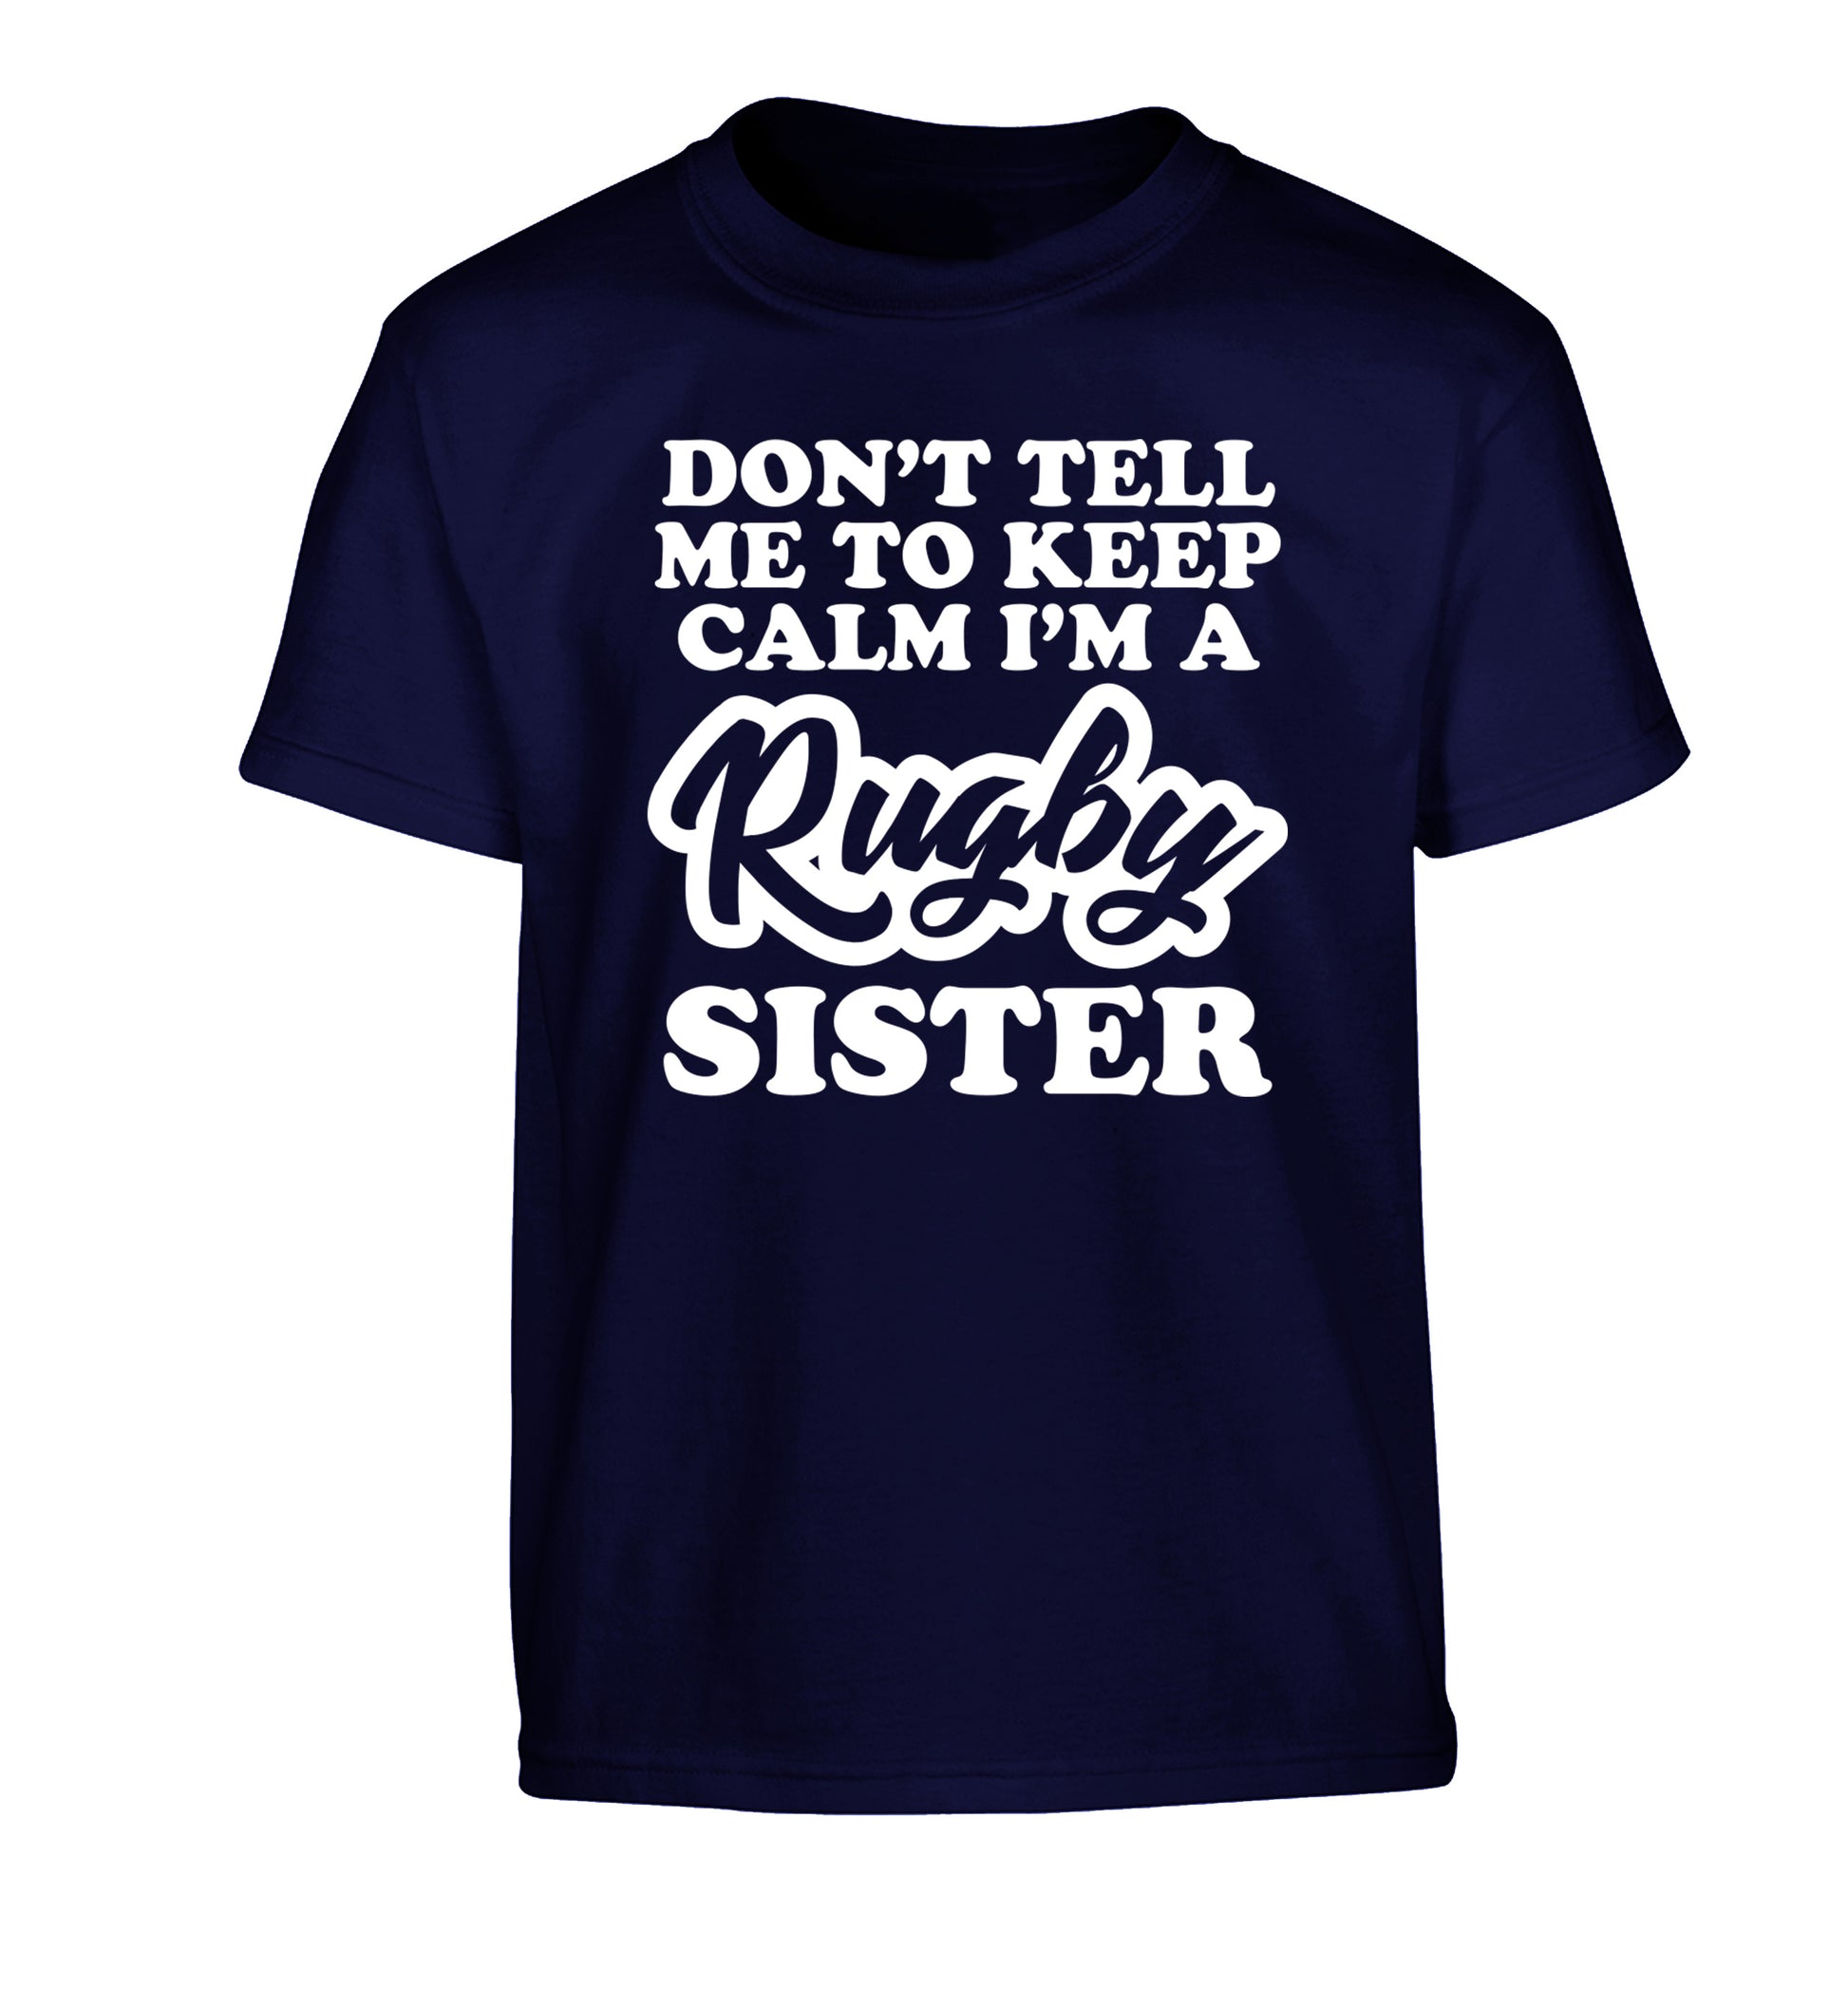 Don't tell me keep calm I'm a rugby sister Children's navy Tshirt 12-13 Years